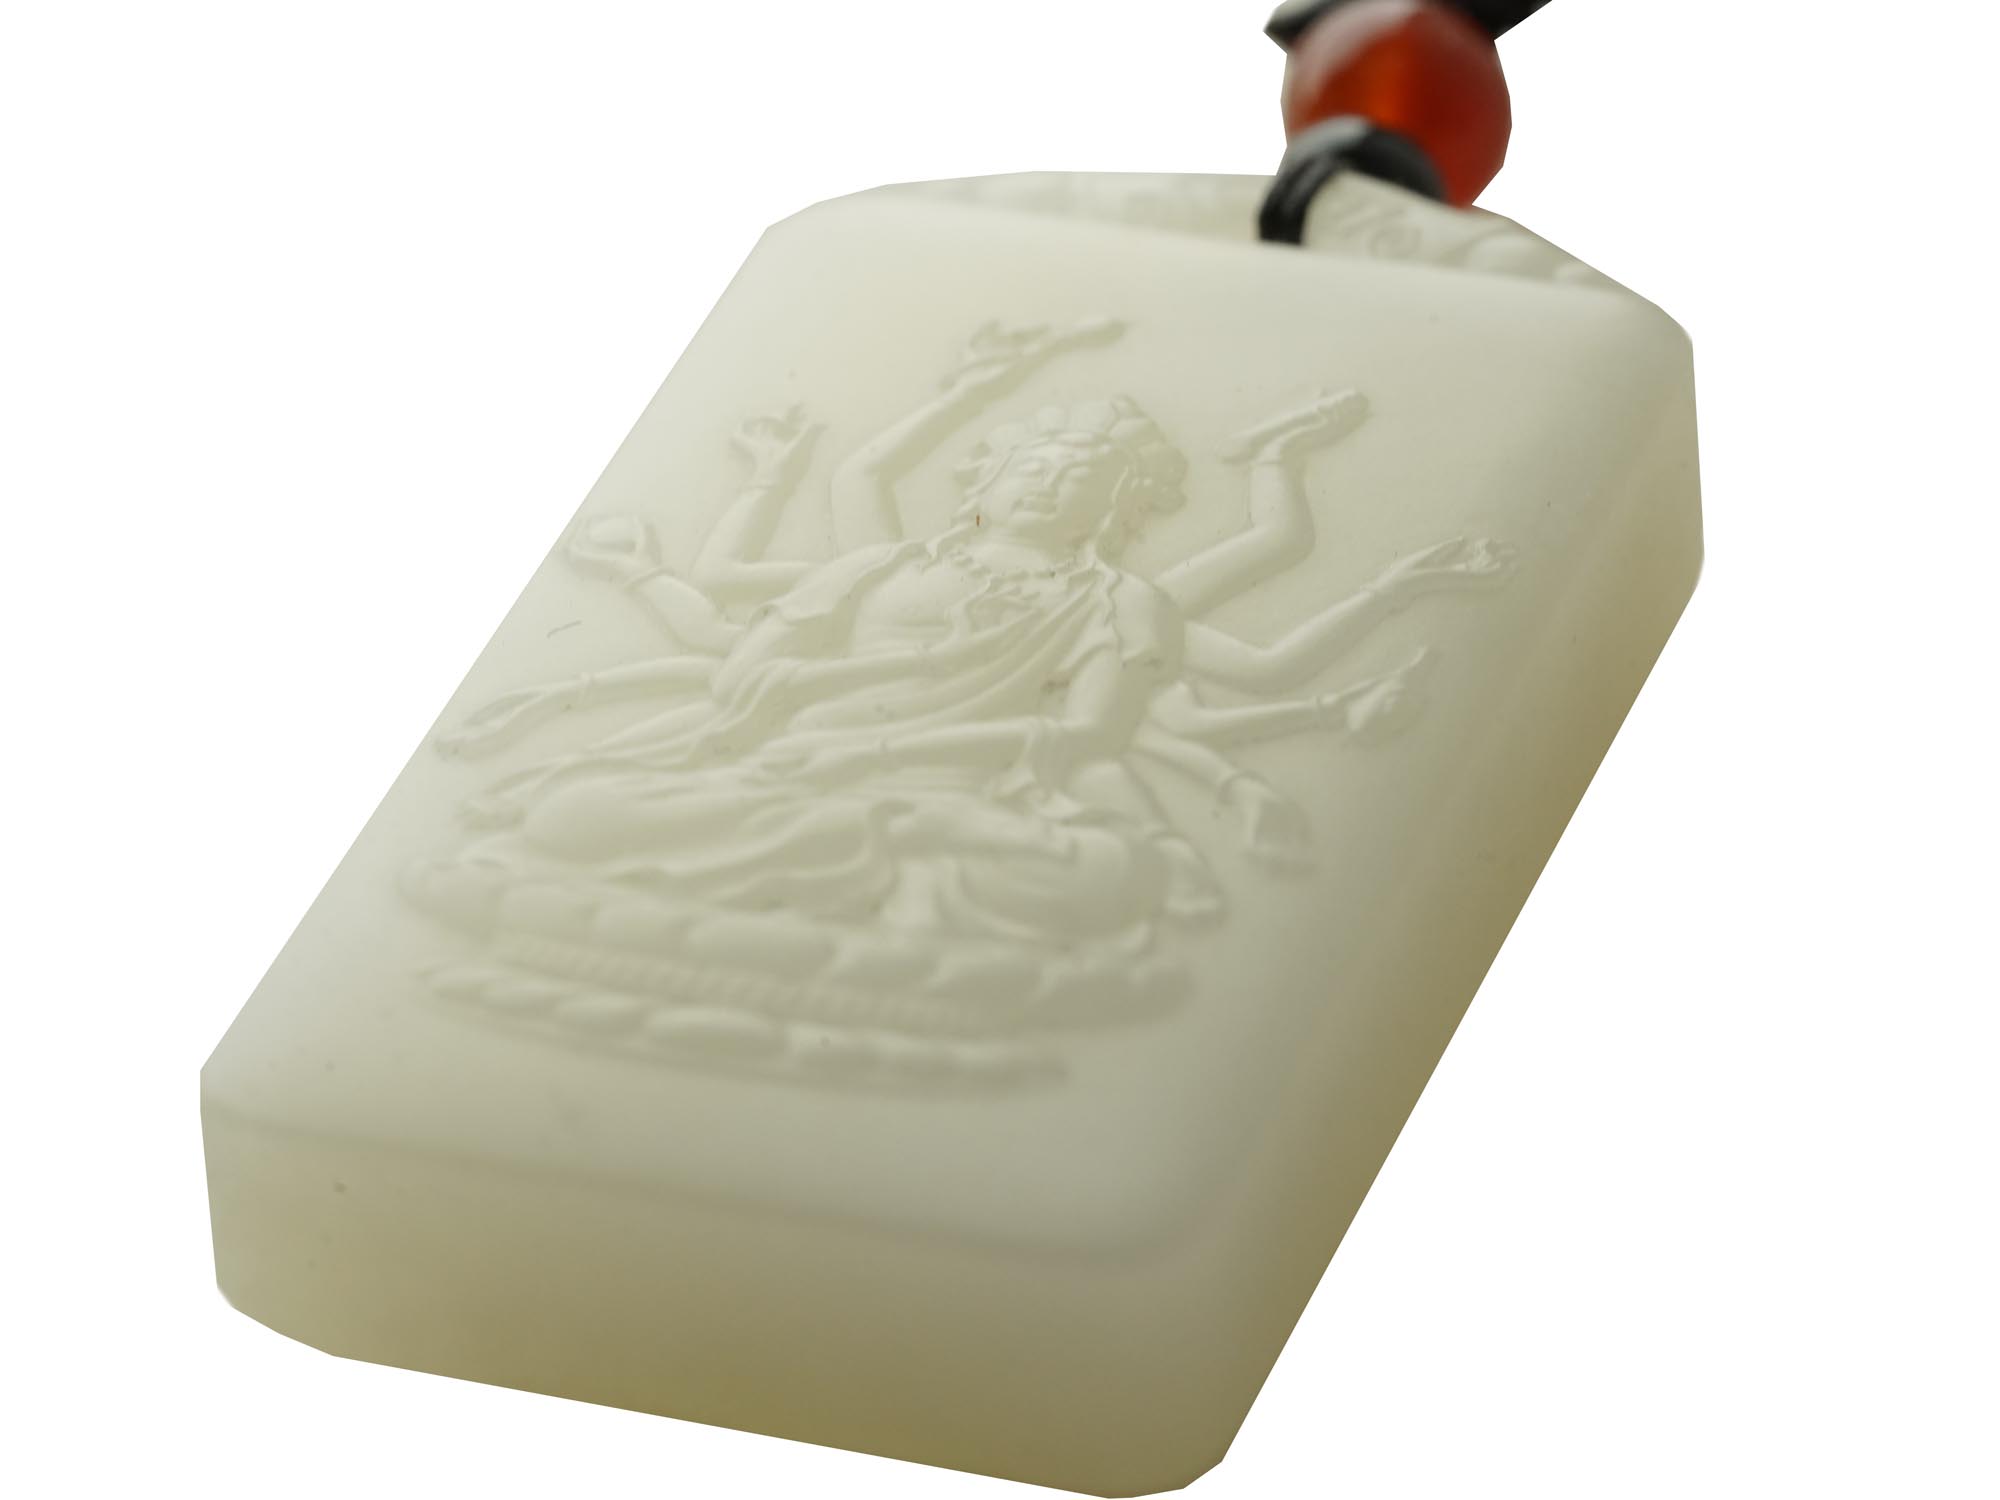 CHINESE HETIAN WHITE JADE GUANYIN CARVED PENDANT PIC-3